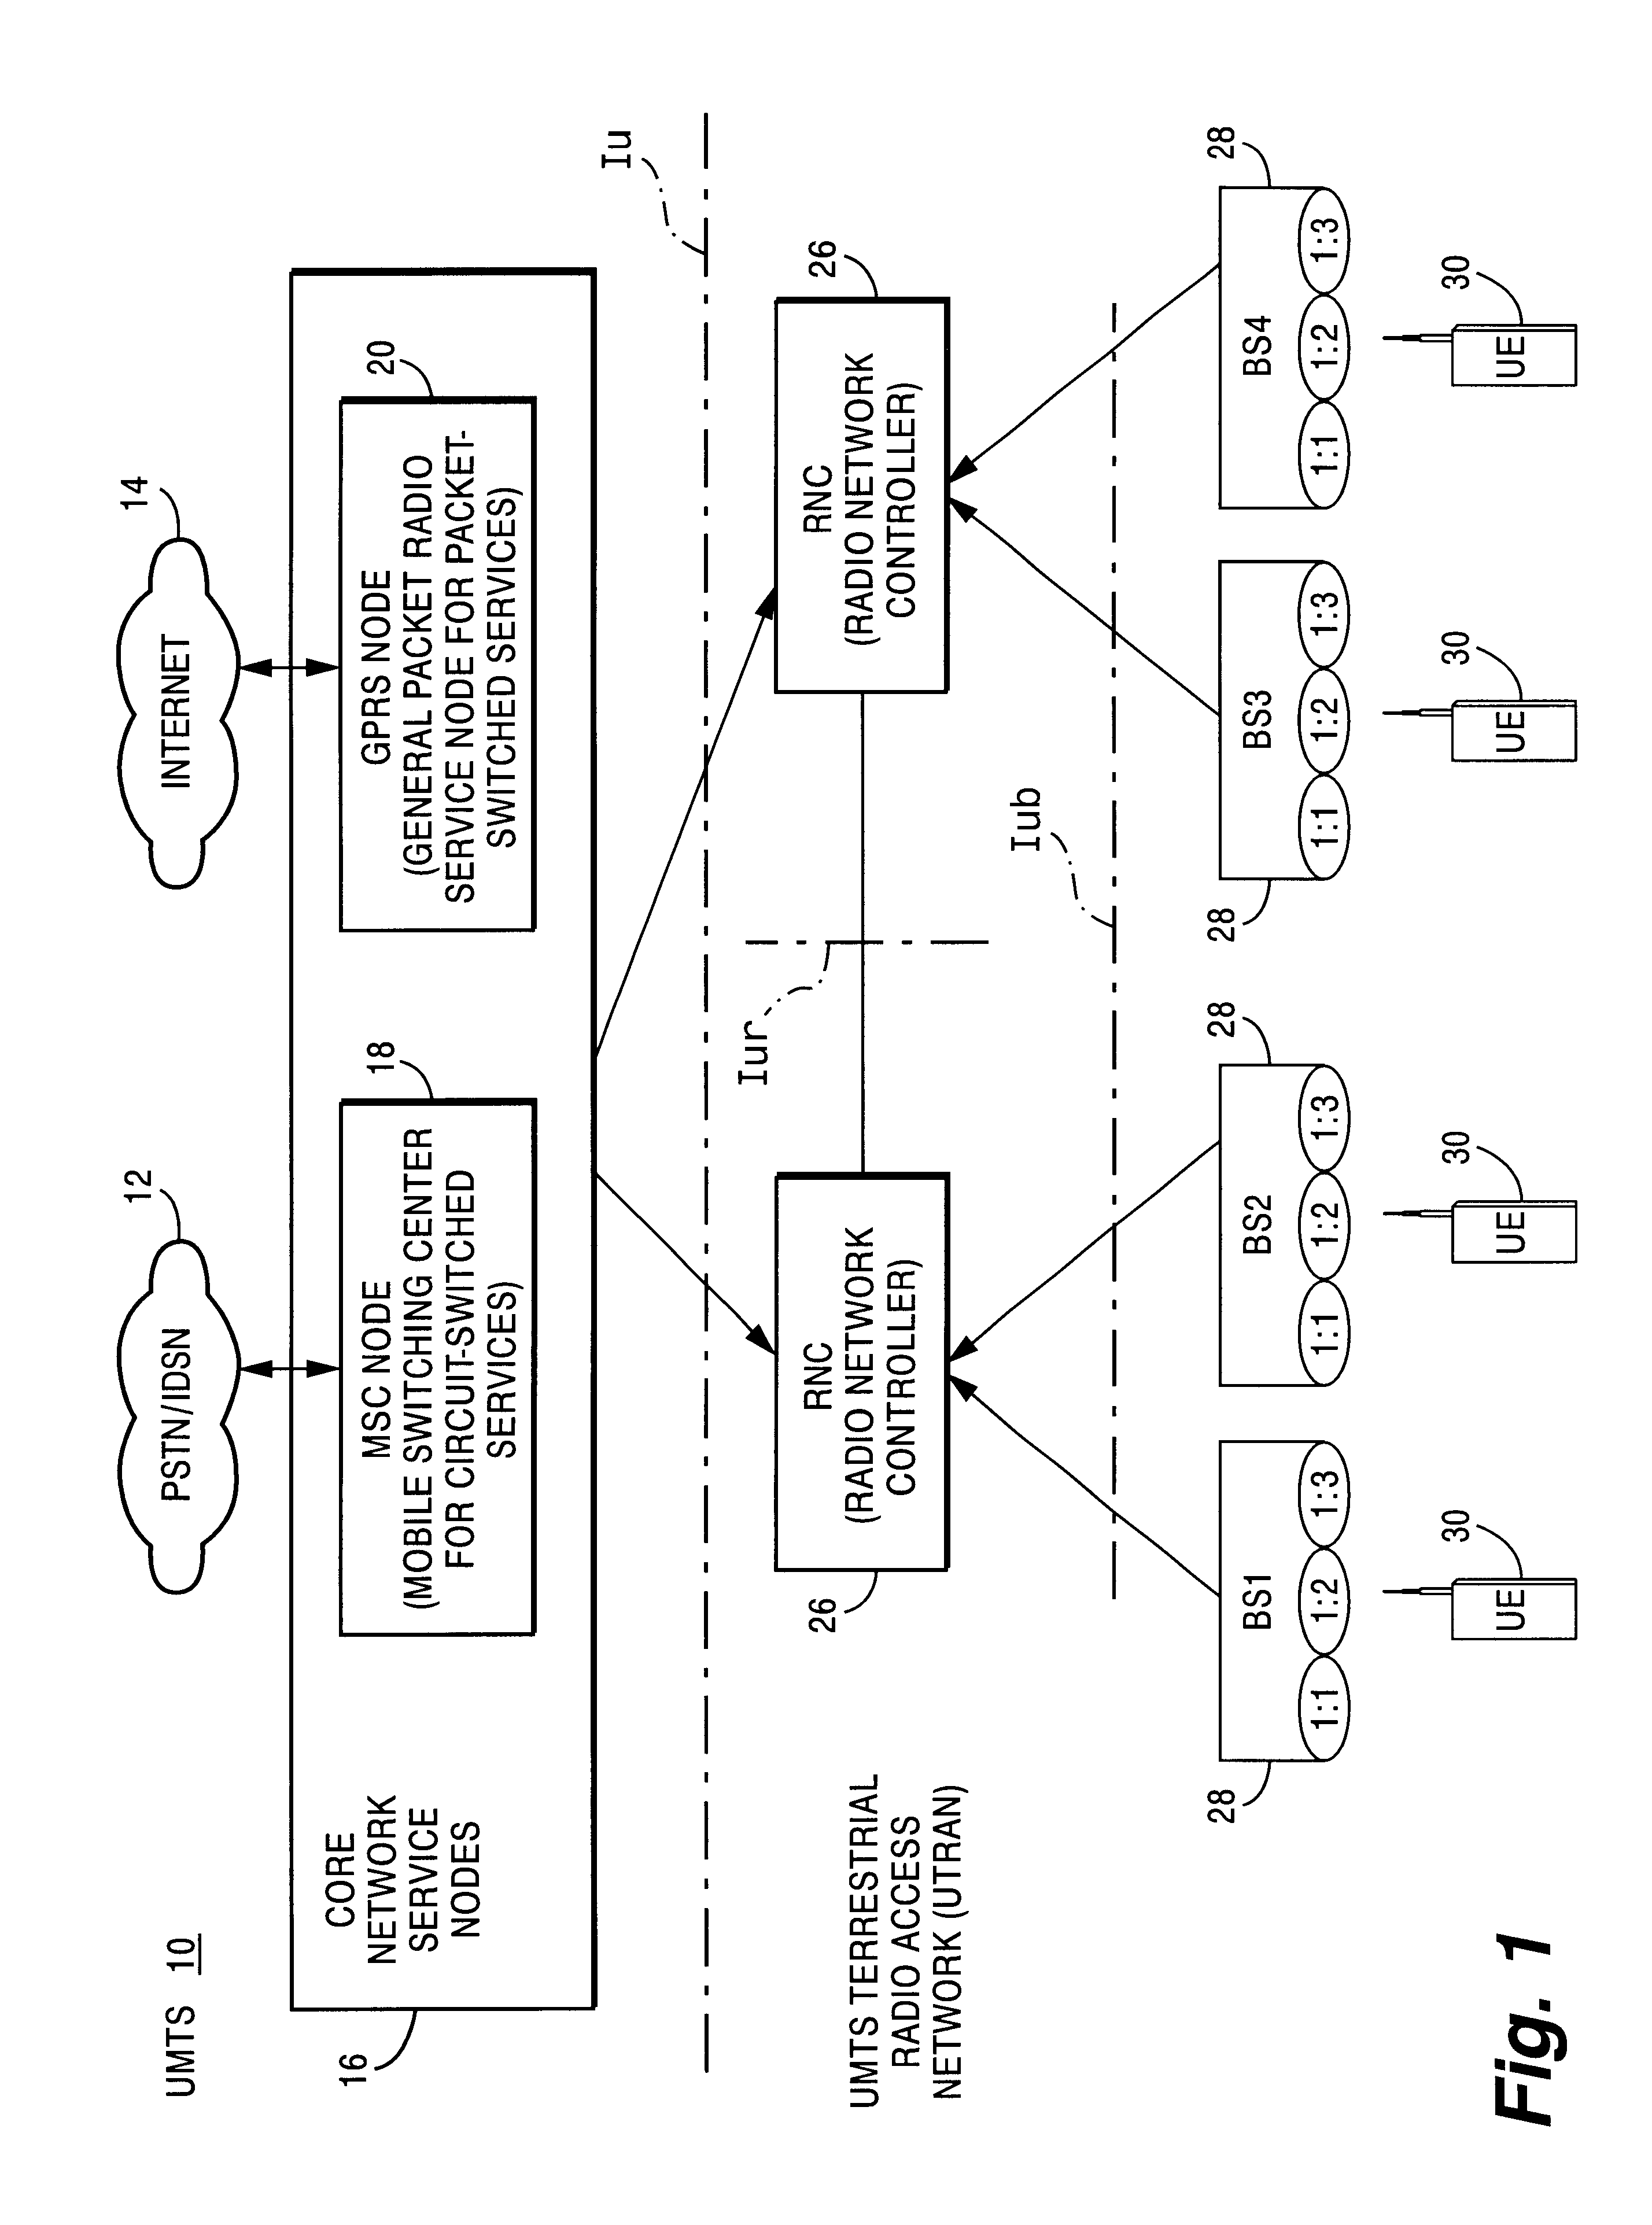 Variable transmission rate services in a radio access network